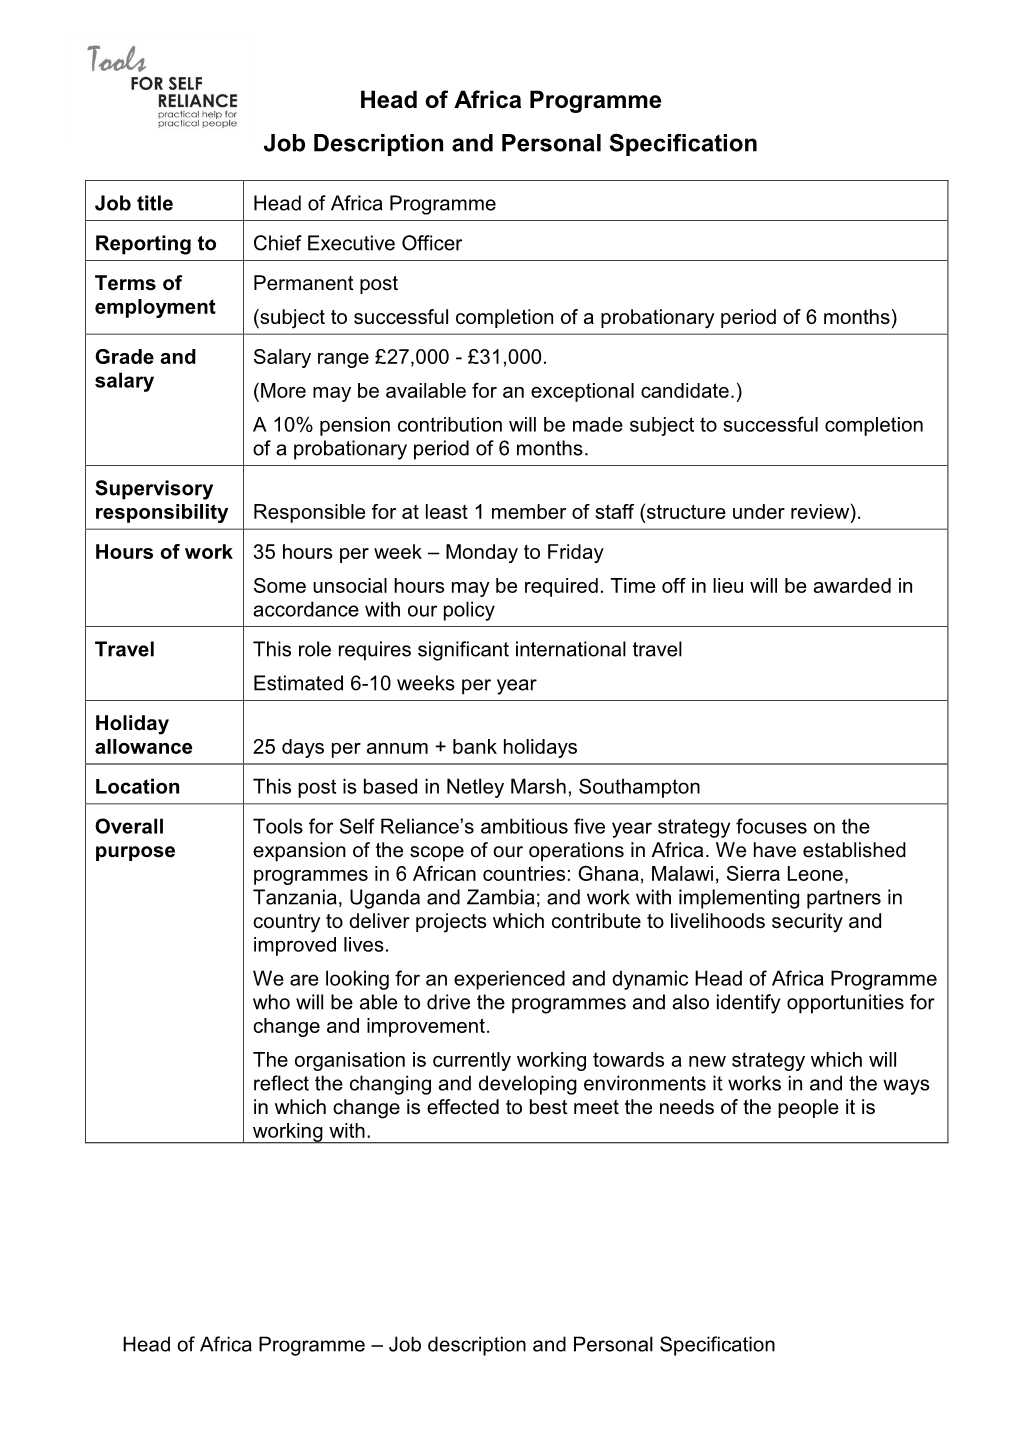 Job Description and Personal Specification